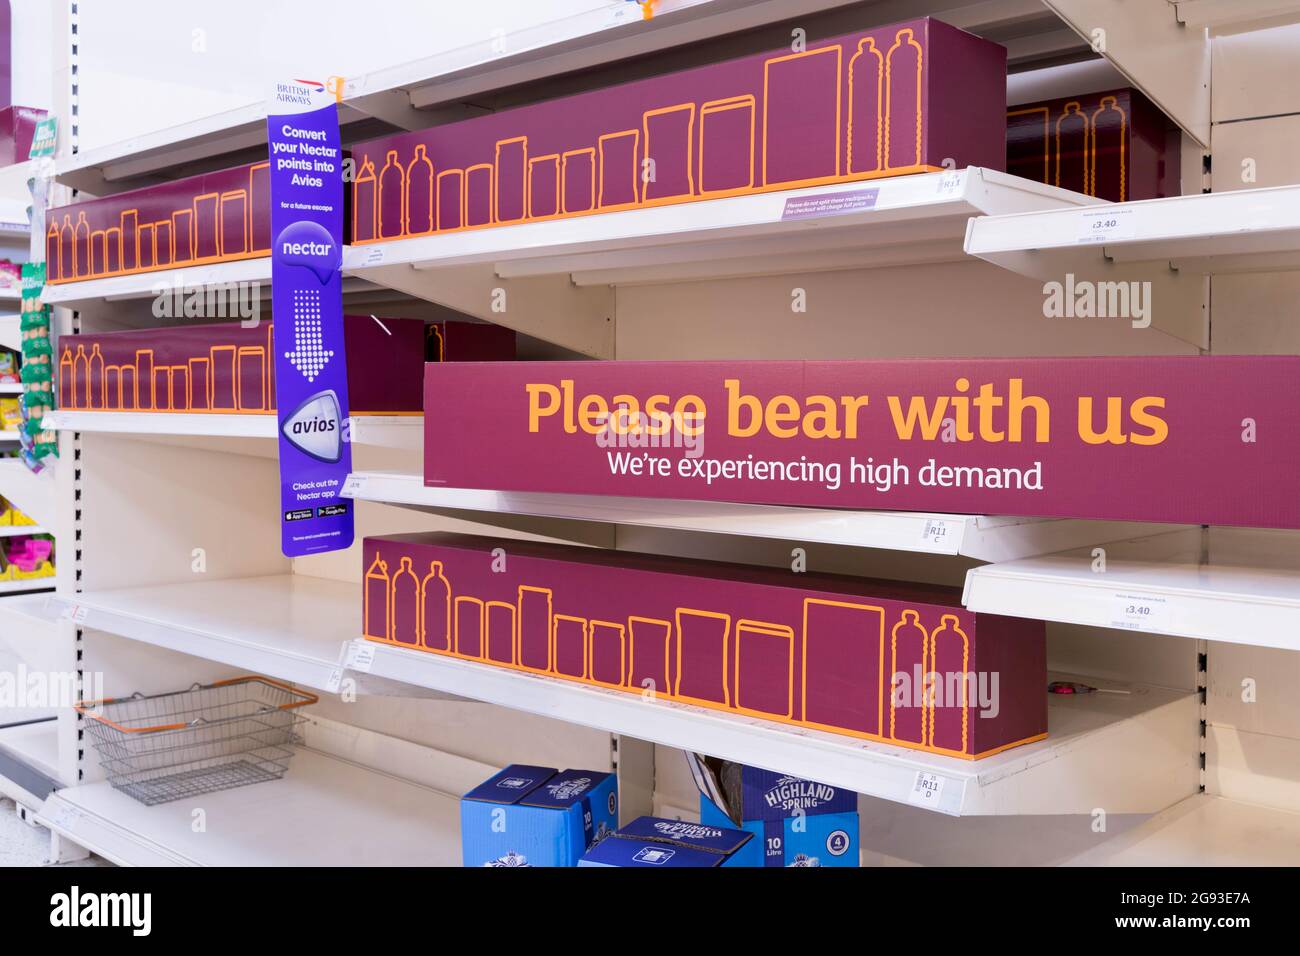 due to shortage of staffs and food supplies, shelves at supermarket Sainsbury's displaying 'please bear with us' and replaced with empty cartoon box Stock Photo